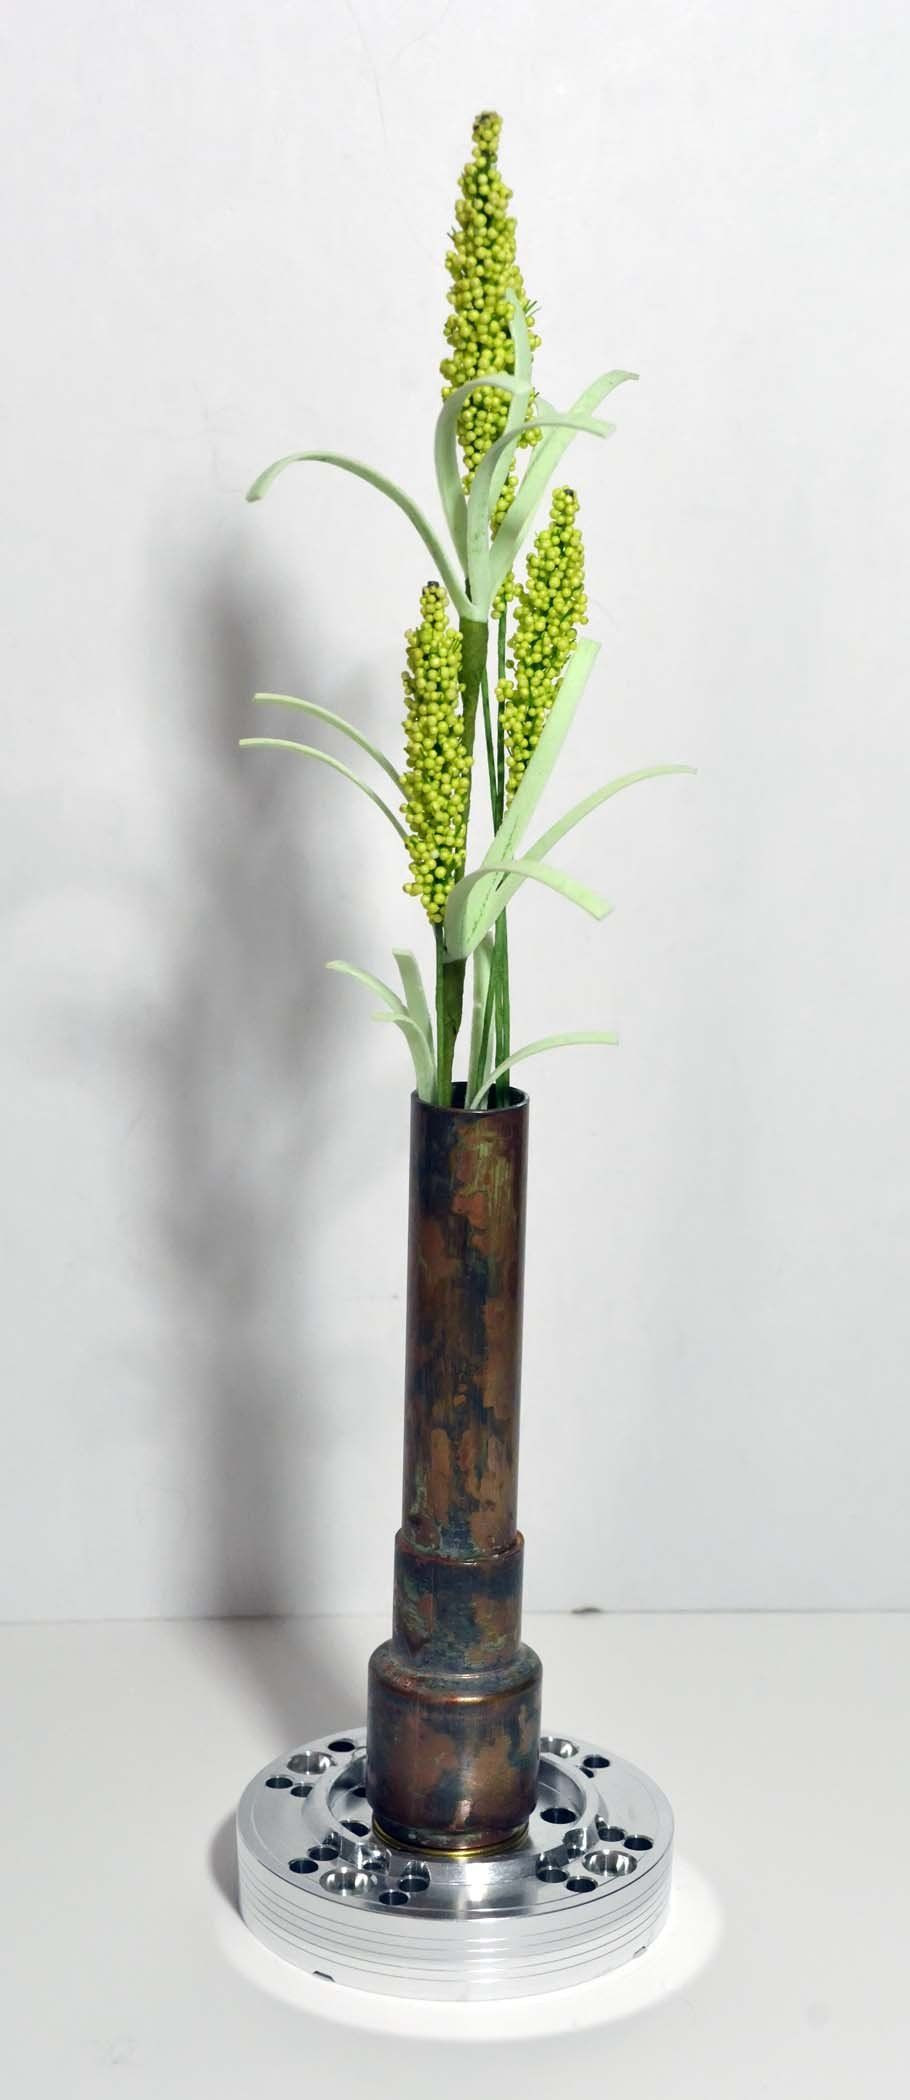 29 Perfect Bud Vase Flowers 2023 free download bud vase flowers of steampunk style decorative dried bud vase made from recycled regarding beautiful unique dried bud or candle vase holder not to be used with water artificial flowers inclu